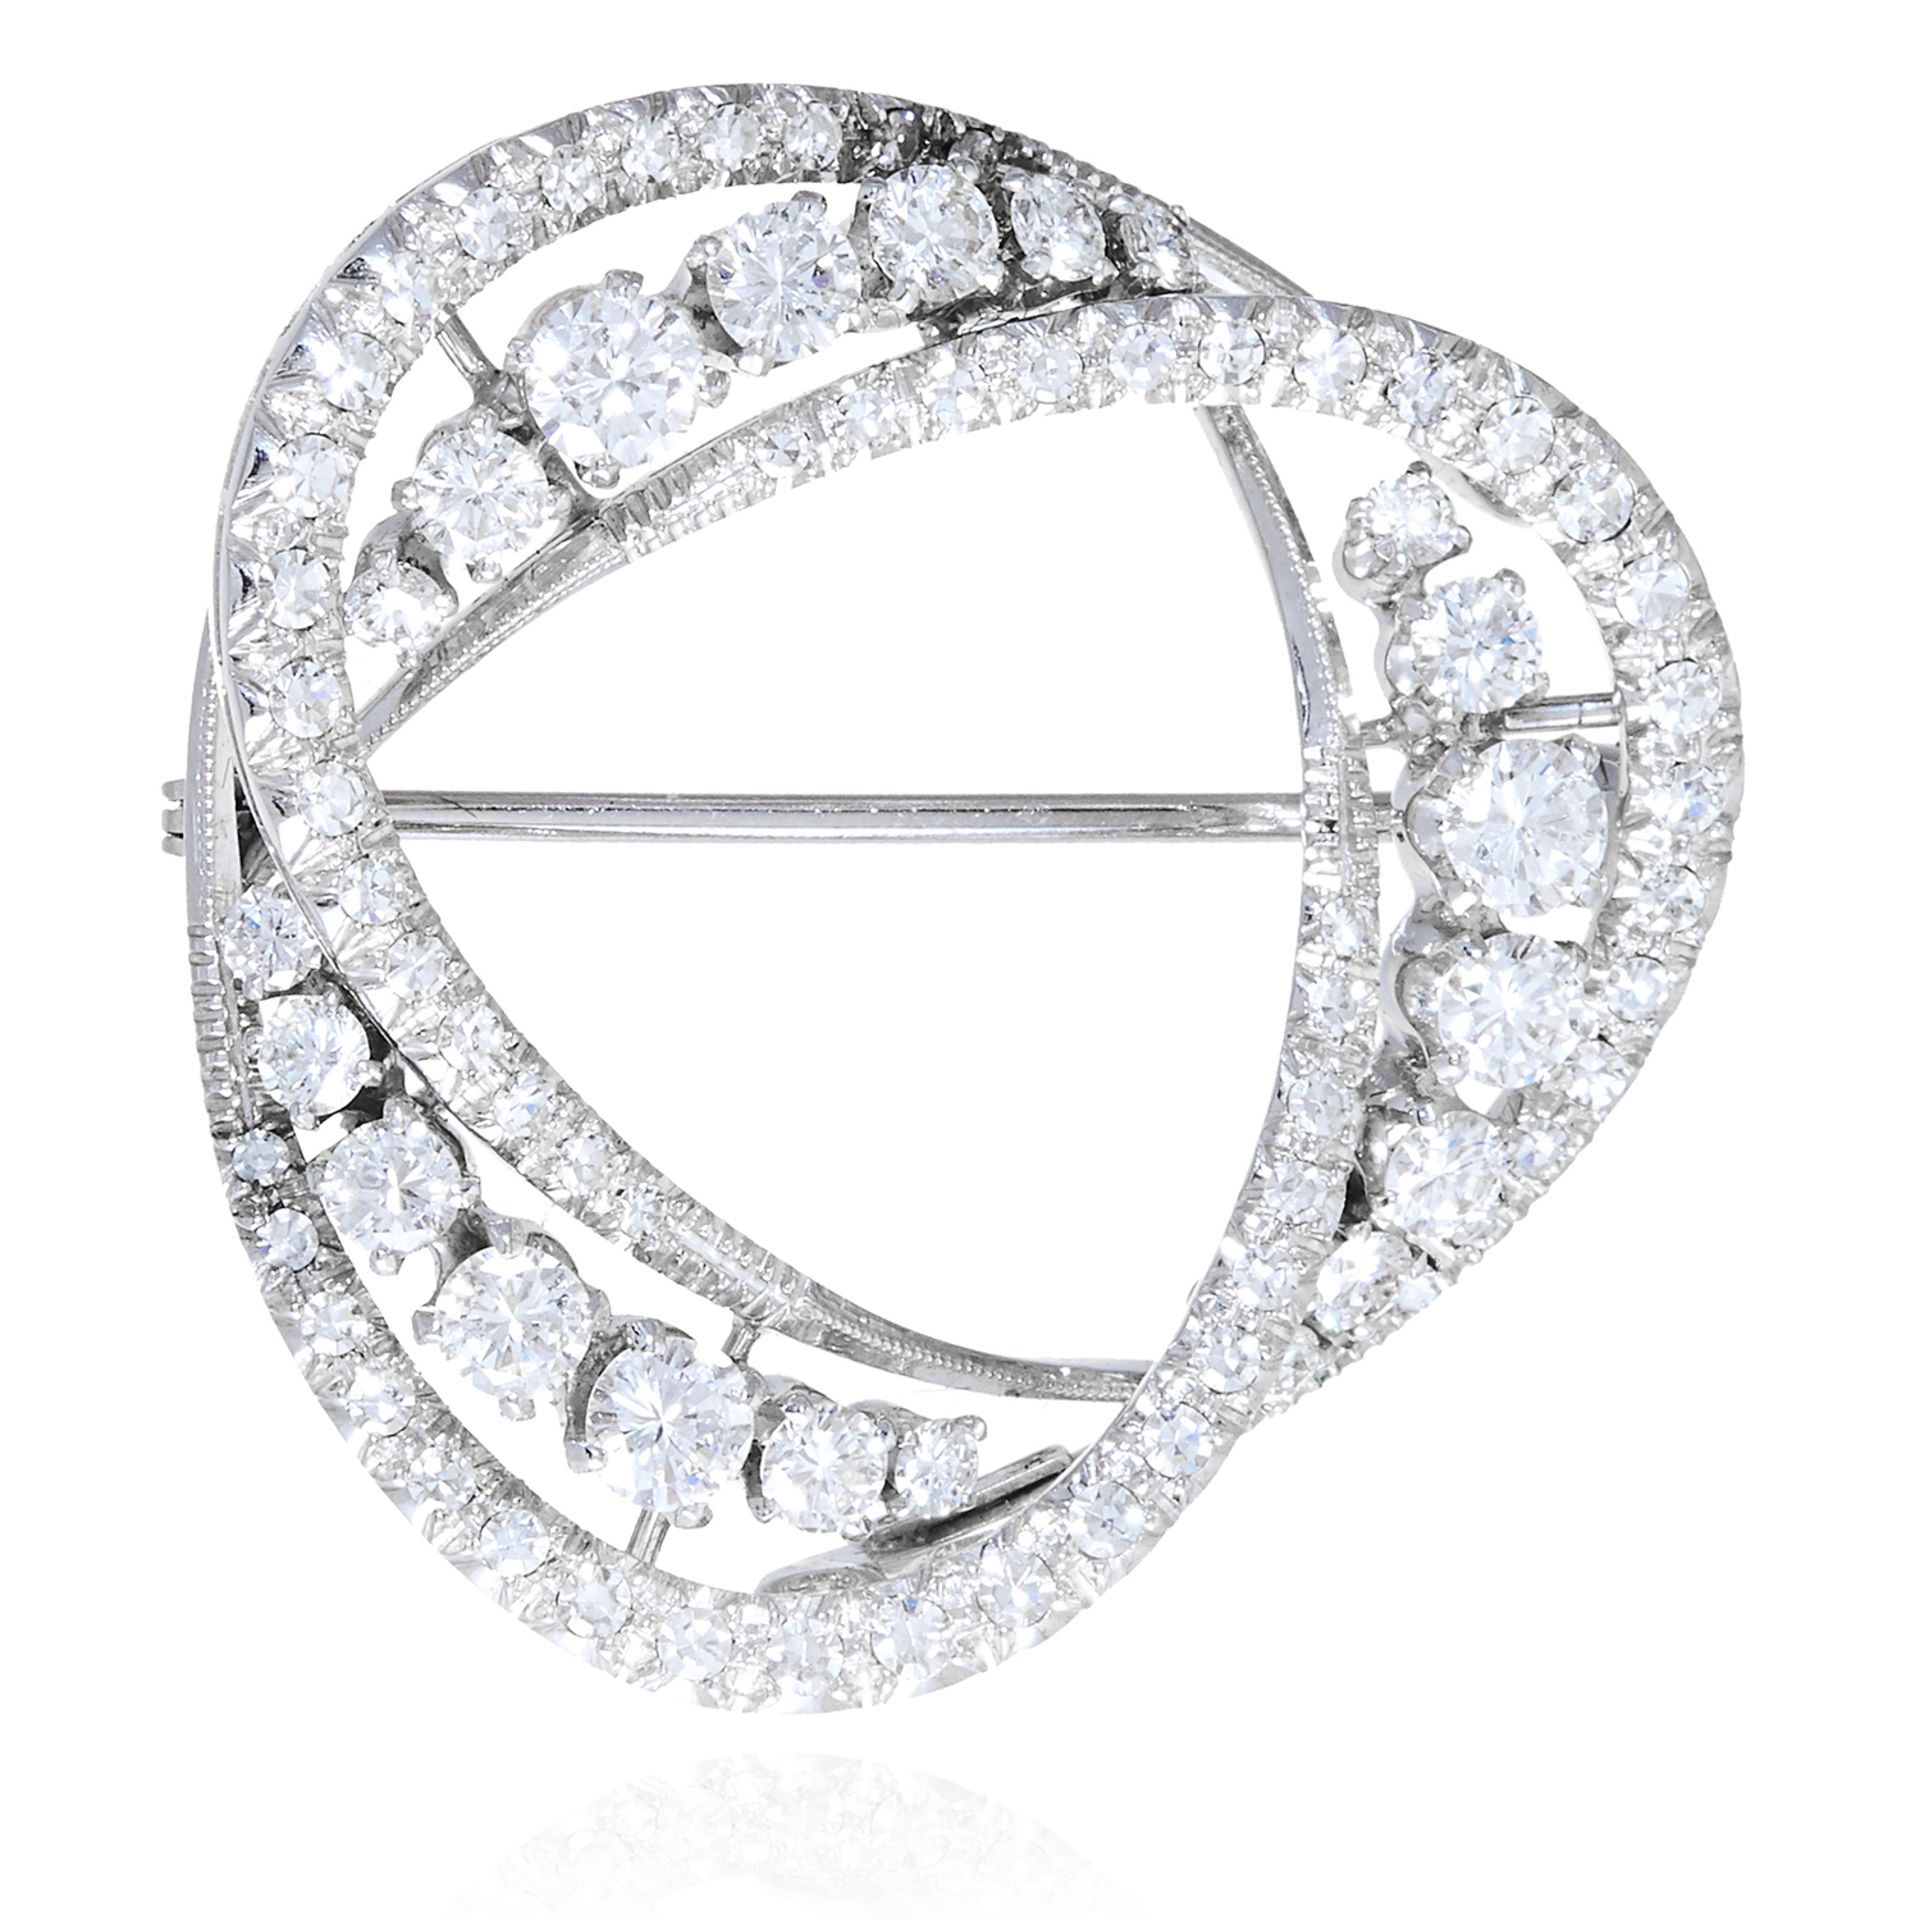 A DIAMOND BROOCH in white gold or platinum, in abstract circular form, jewelled with round cut